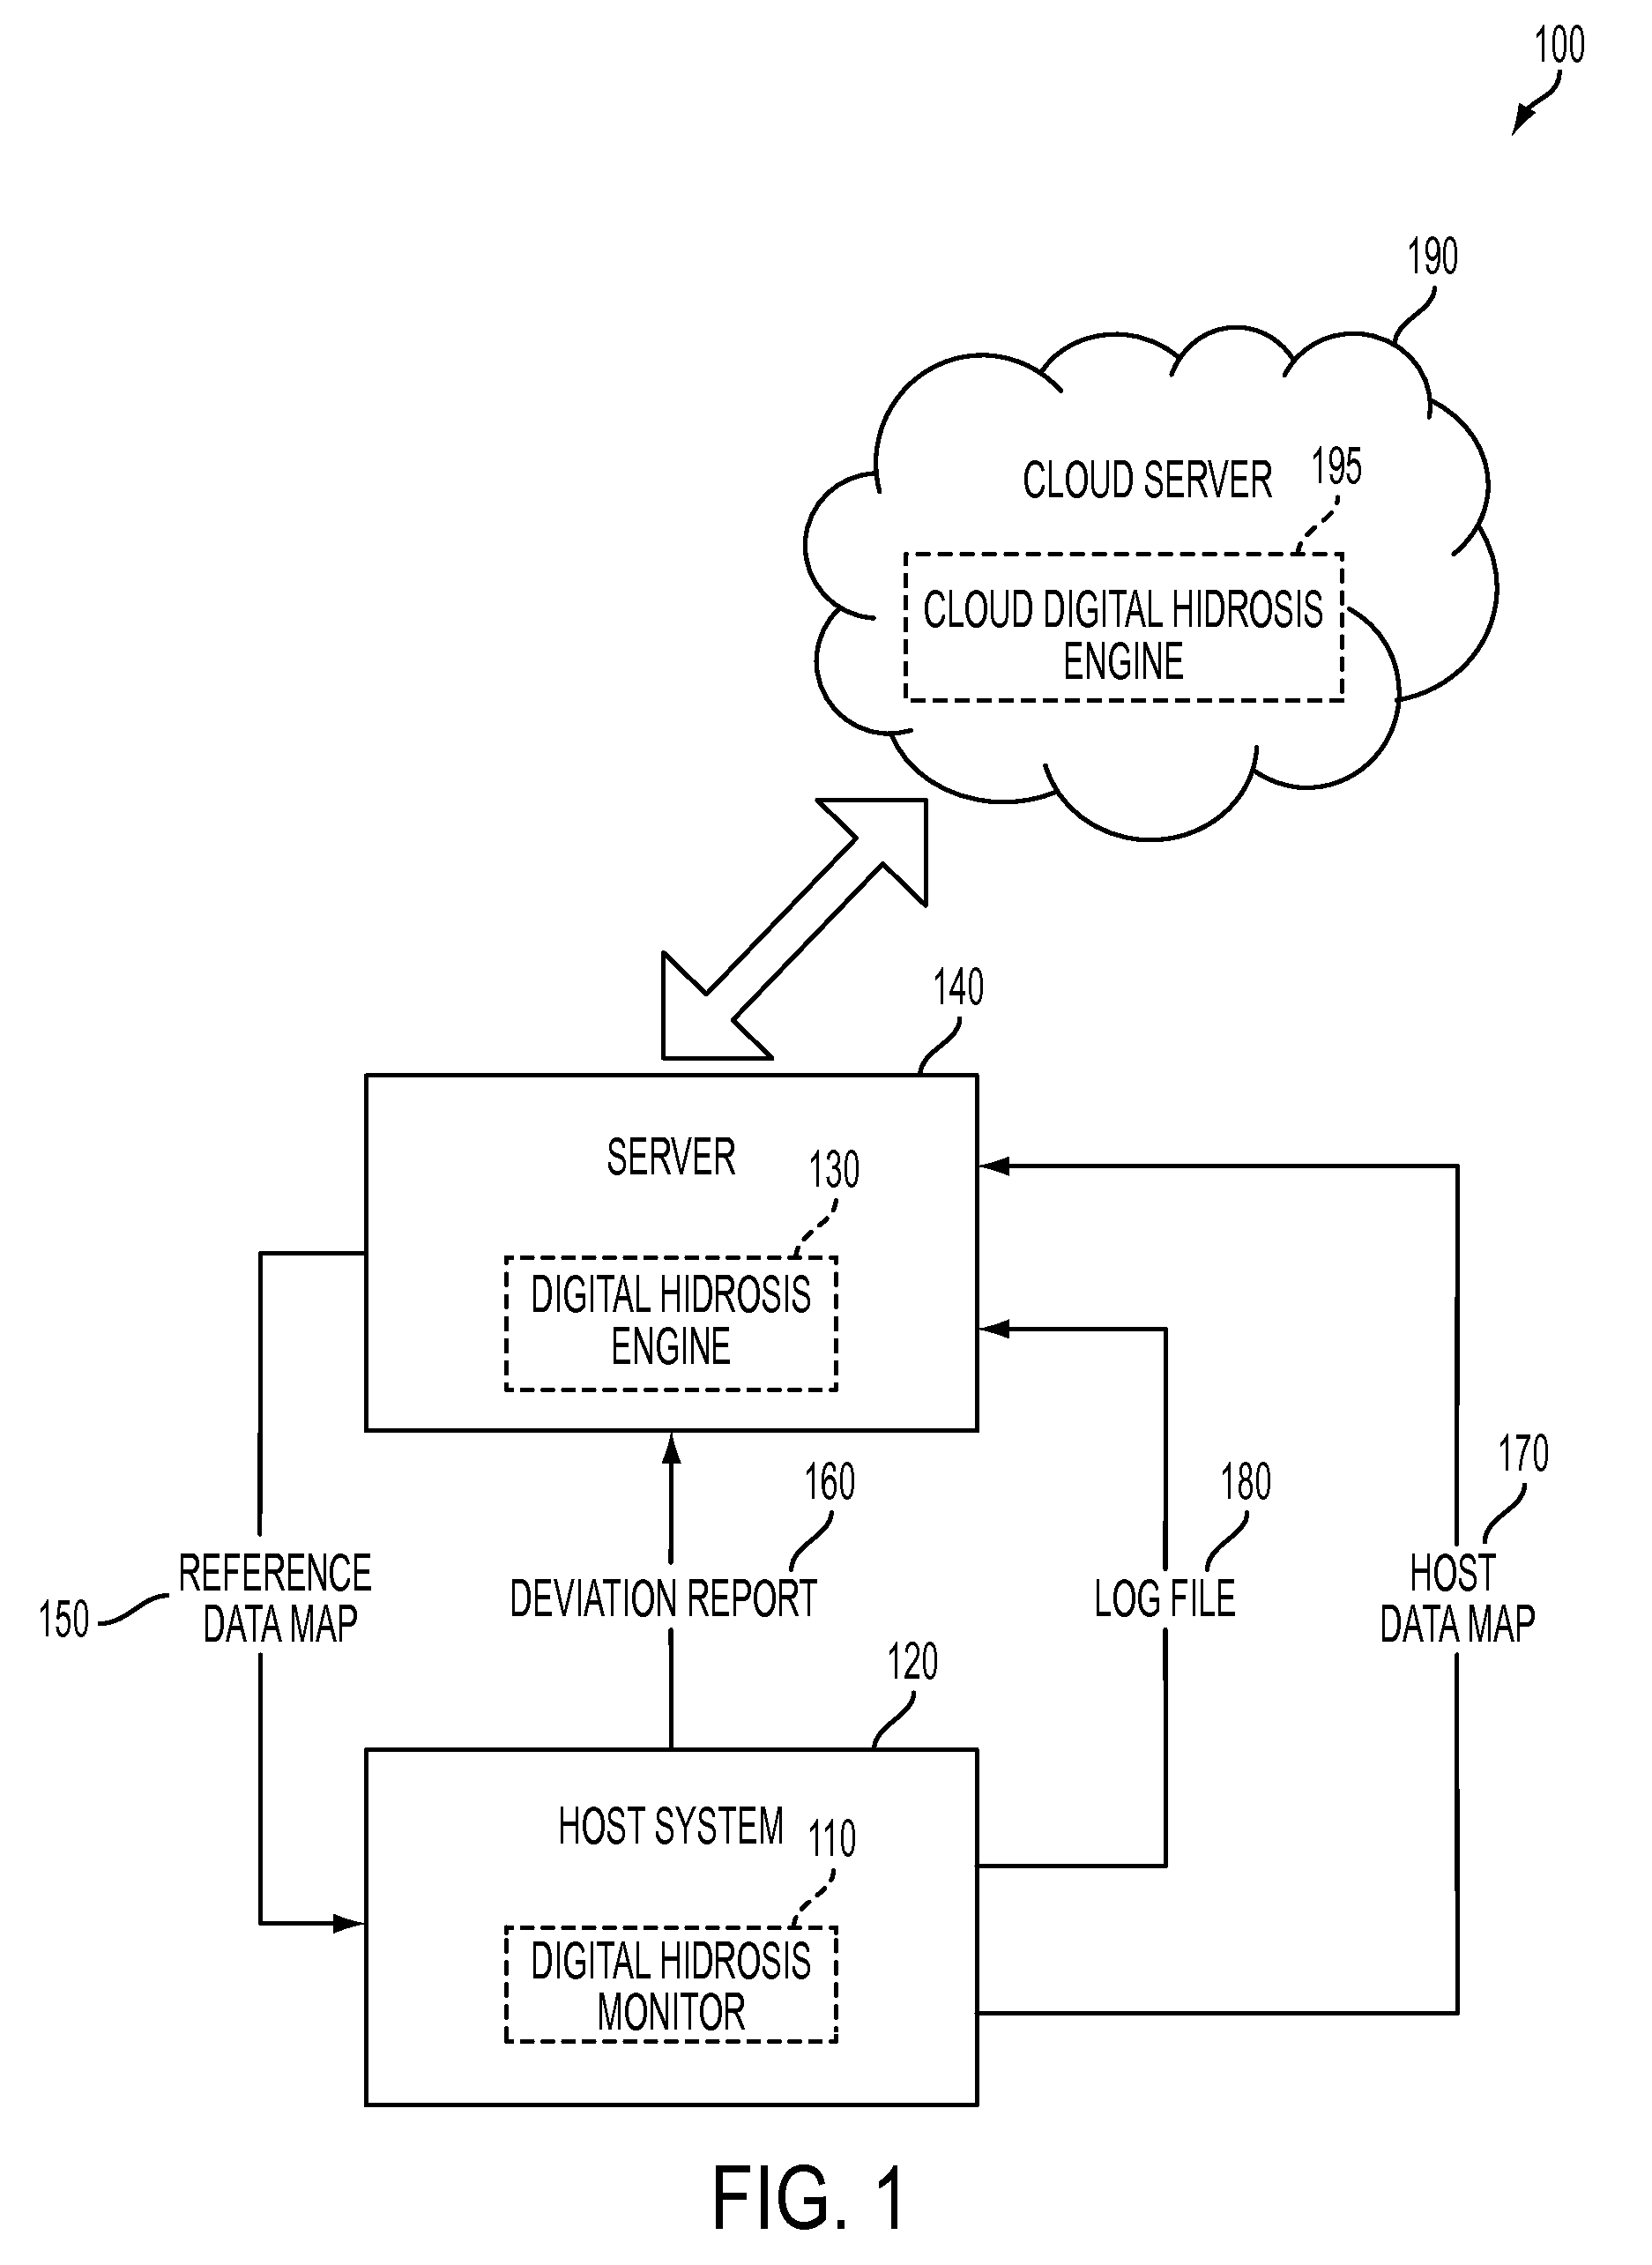 System and method for detecting potential threats by monitoring user and system behavior associated with computer and network activity